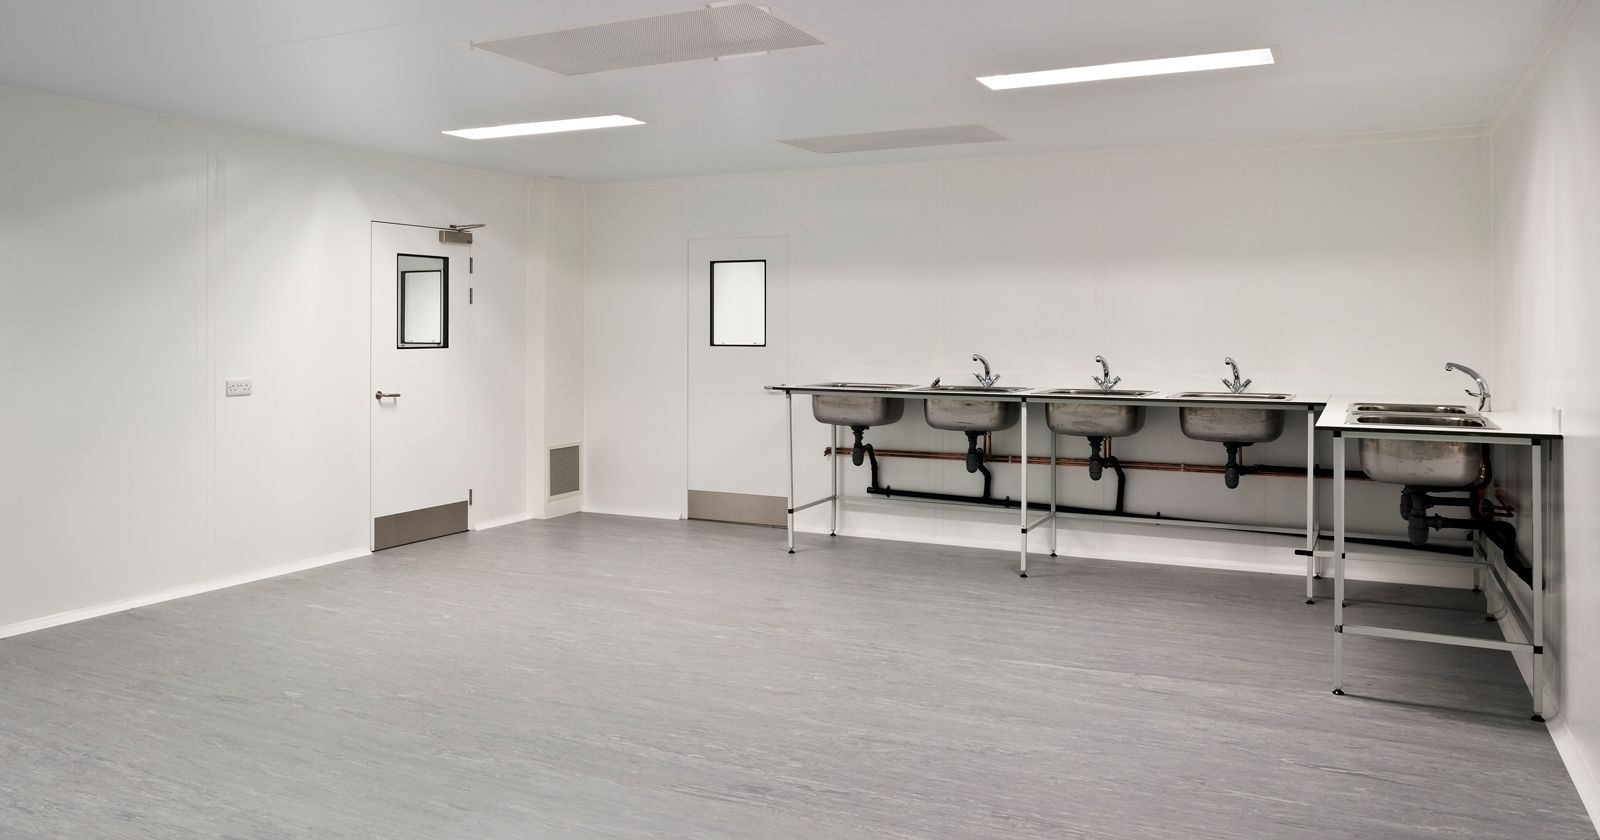 Chalice Medical Clean Room Internal sinks and Steel Partitions by APSS